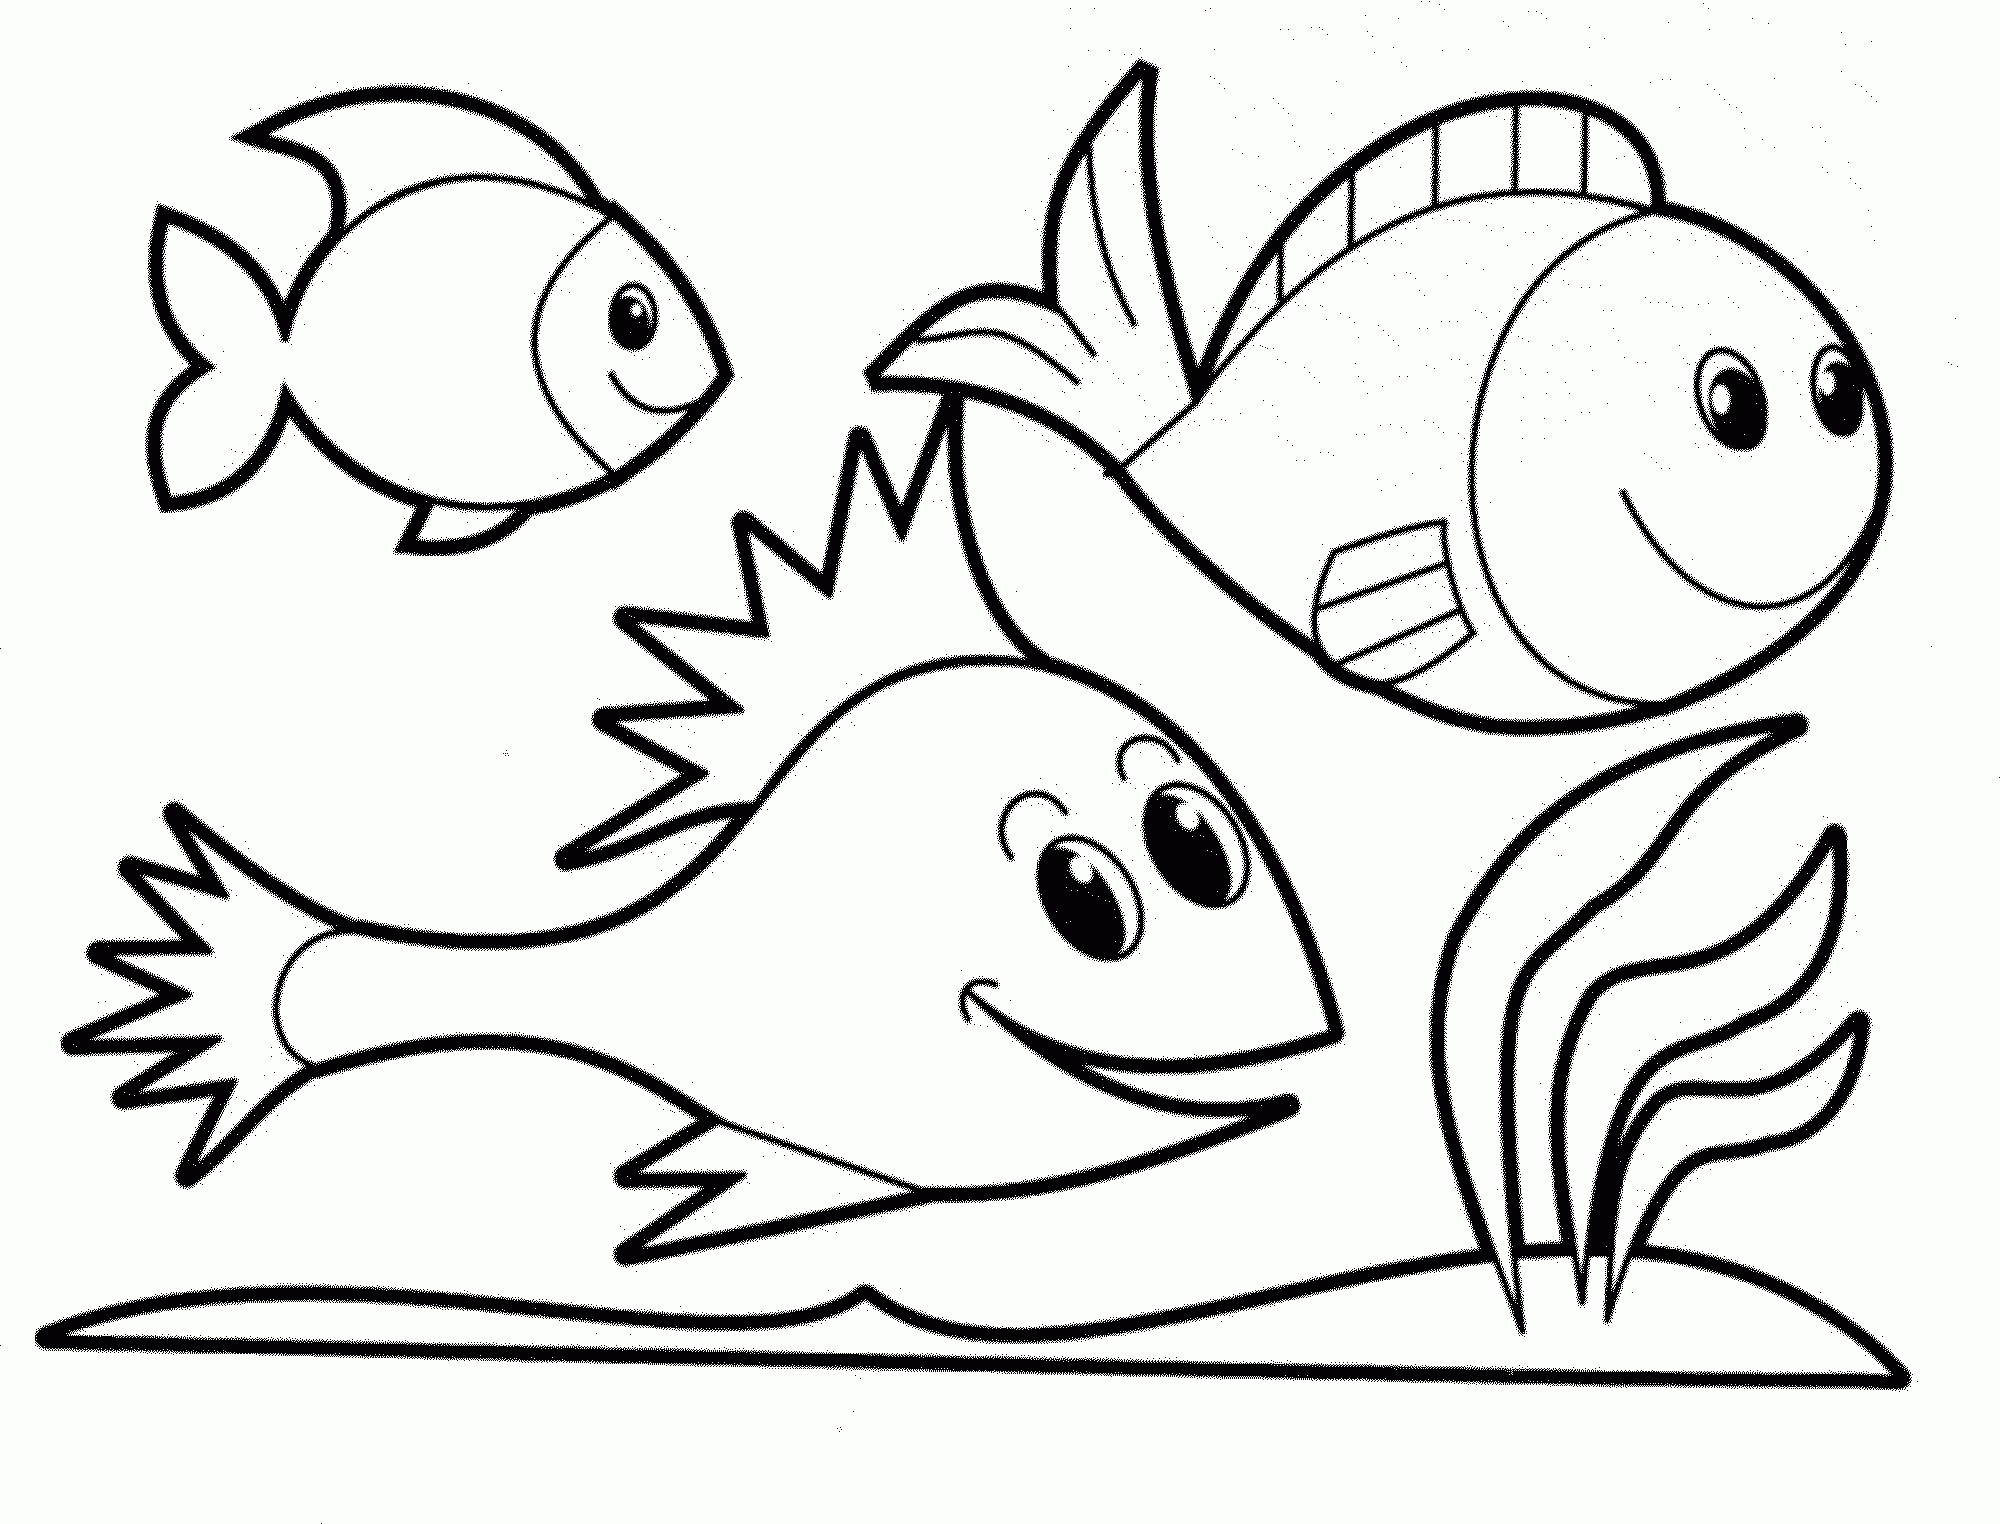 Free Fish Swimming Coloring Pages For Kids - VoteForVerde.com